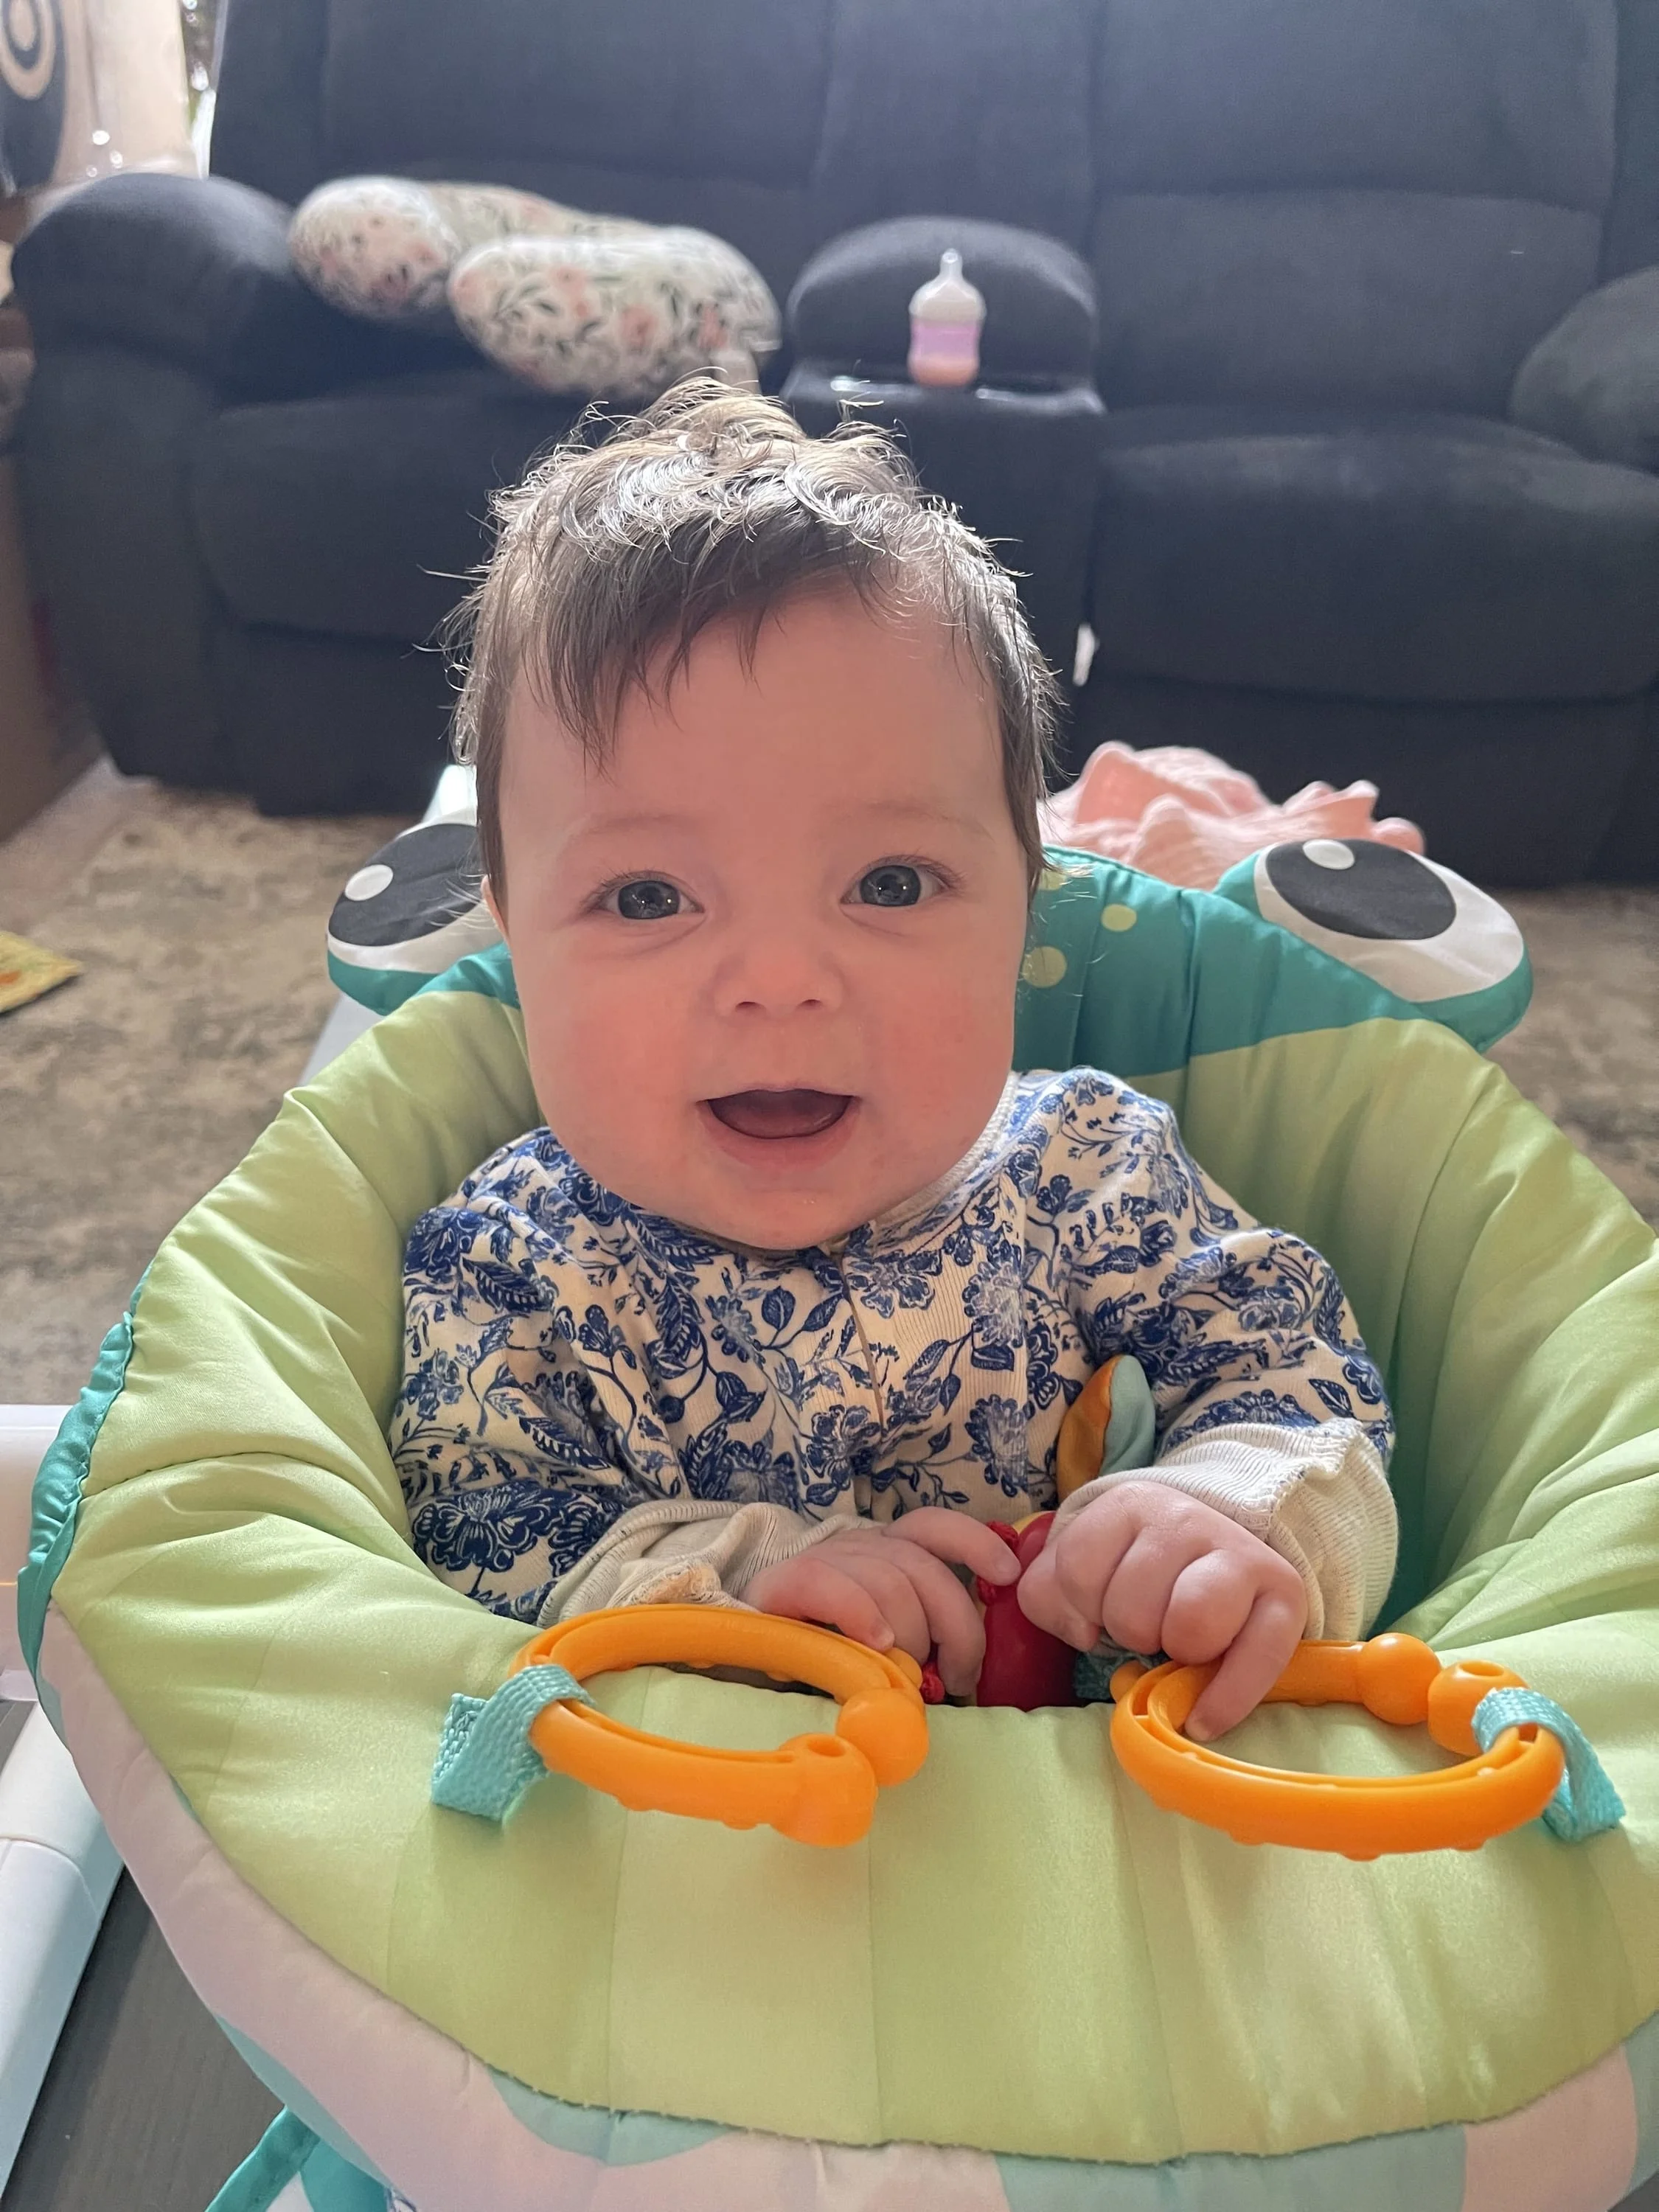 I was a Gerber baby, and now my Charlie is a Gerber baby! 